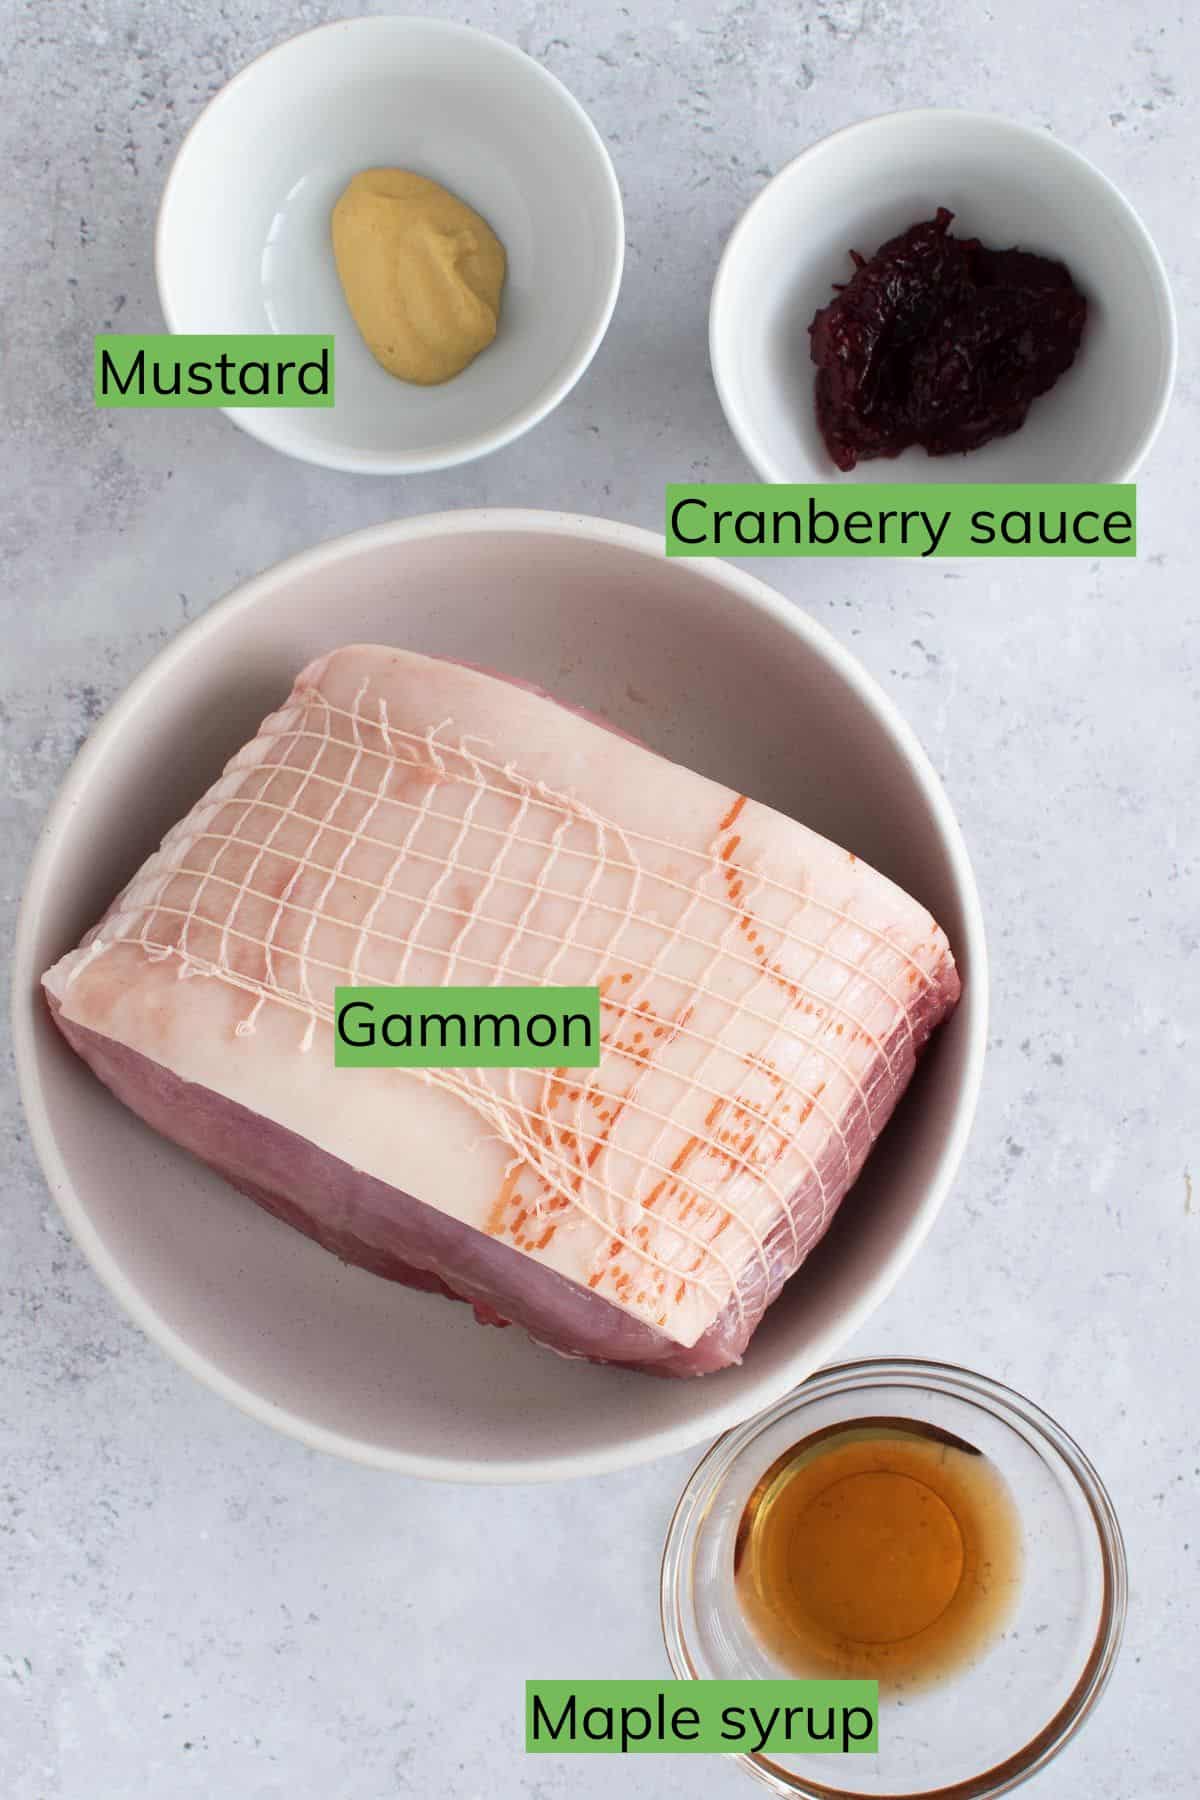 The ingredients required to make this recipe.